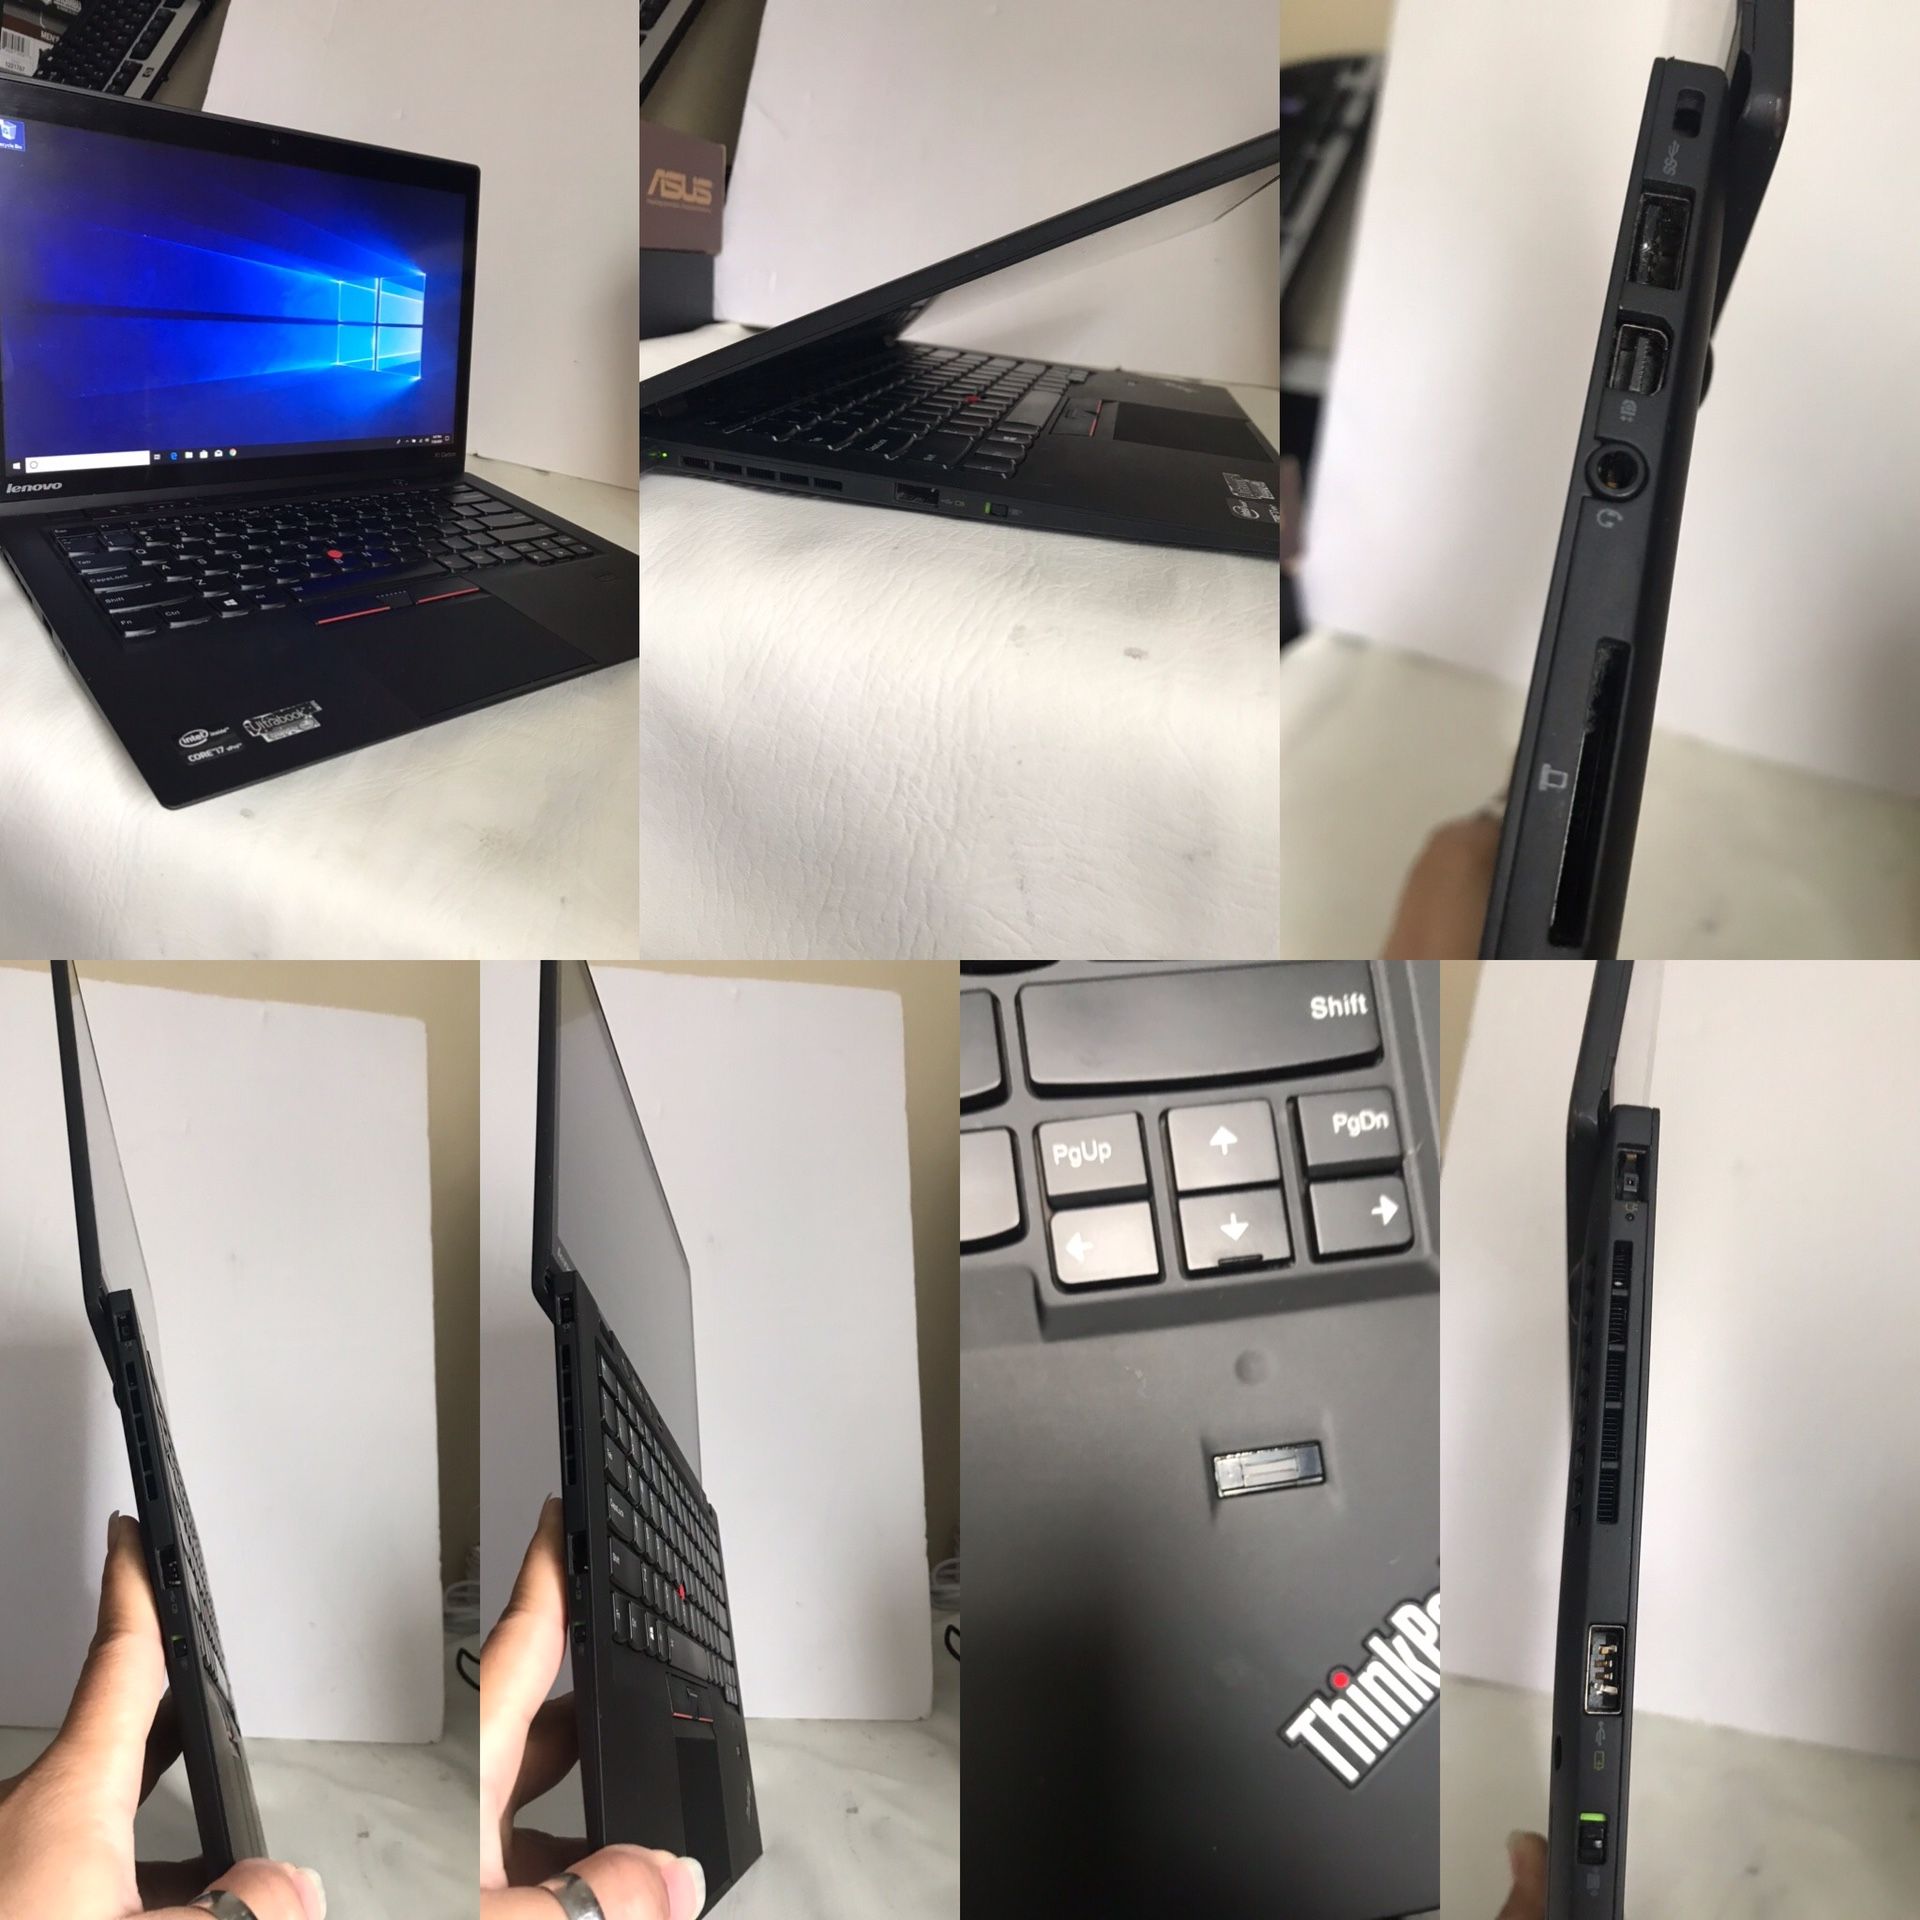 Lenovo ThinkPad X1 Carbon (1st Gen) Touch - 14" - Core i7 3667U (2.0ghz) - 8 GB RAM - 160GB SSD -Original Charger - Intell HD Graphics 4000 - FingerP